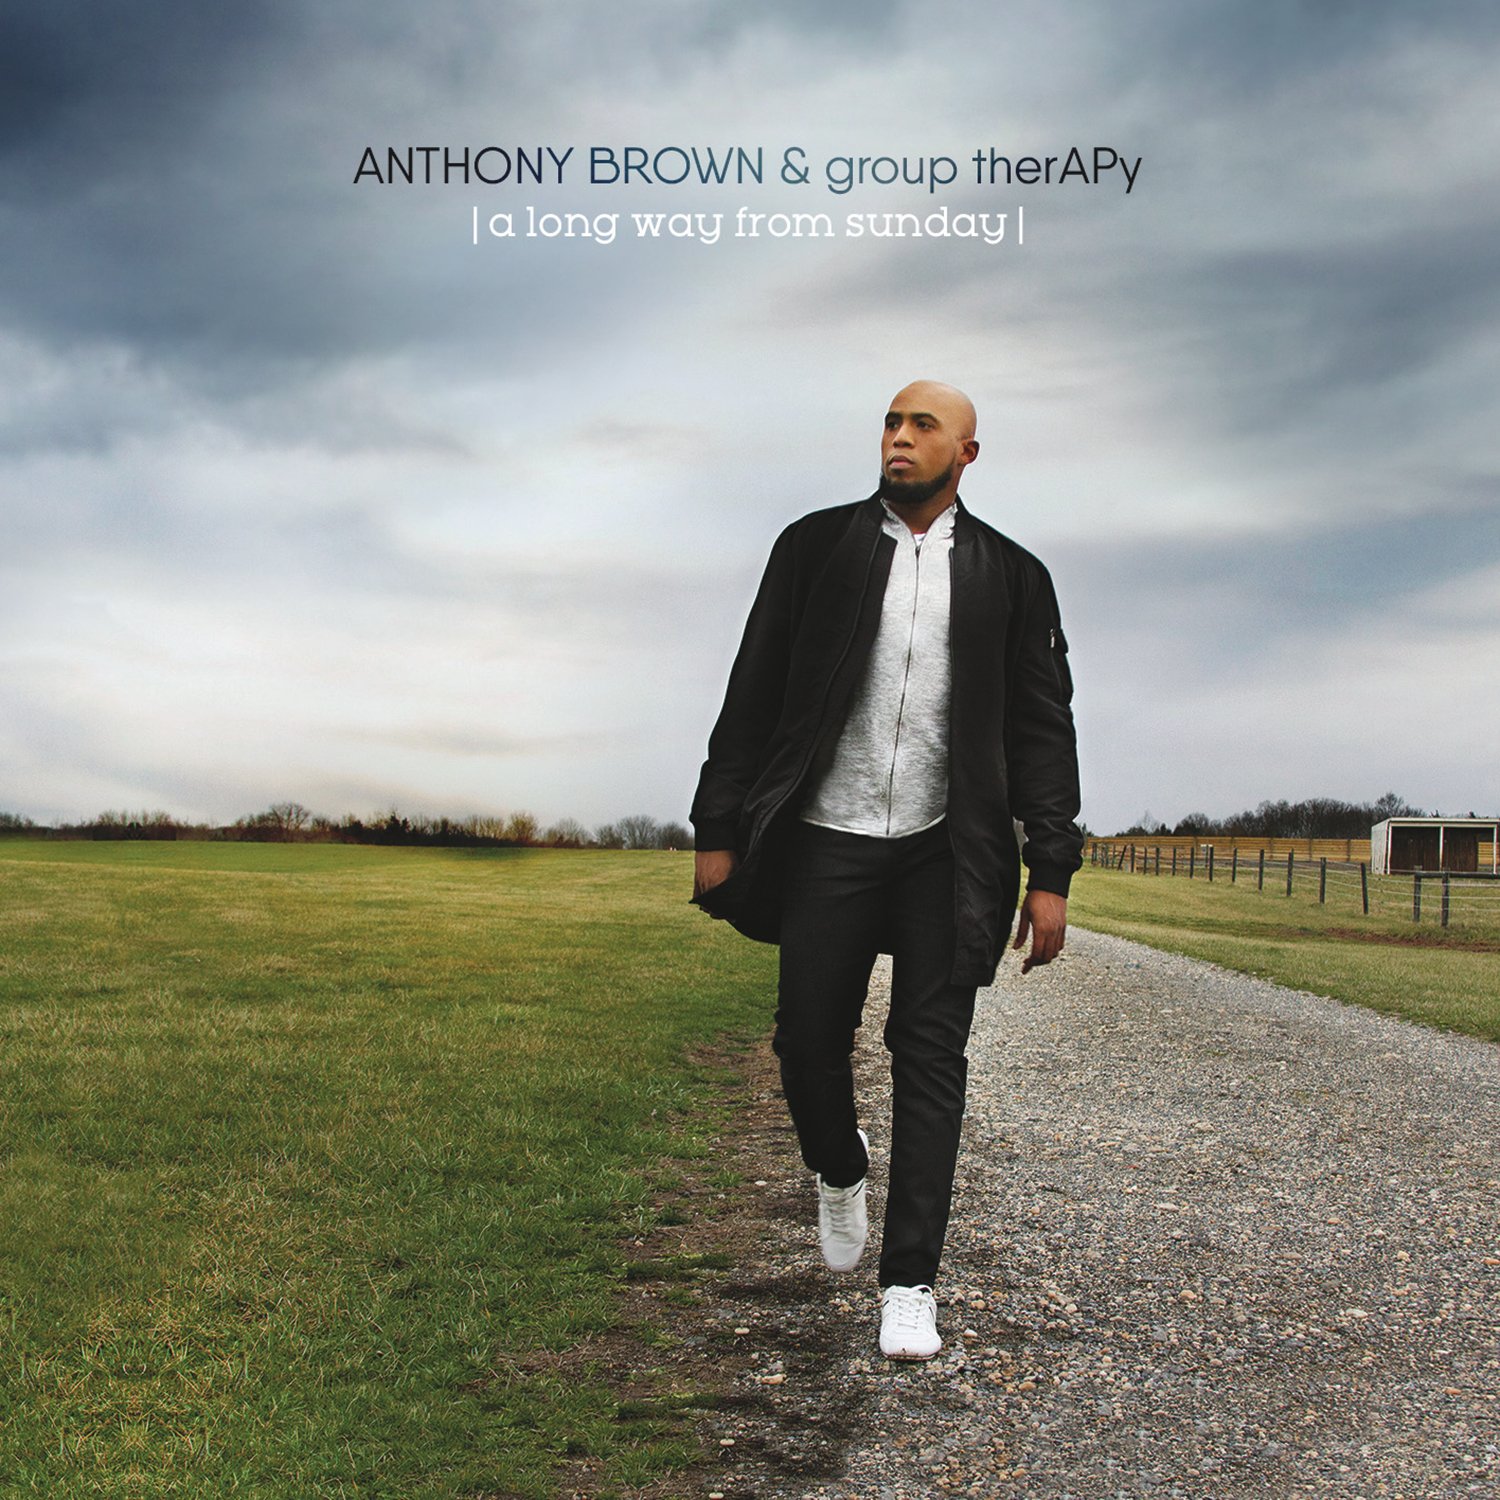 Anthony Brown & group therAPy | A Long Way from Sunday